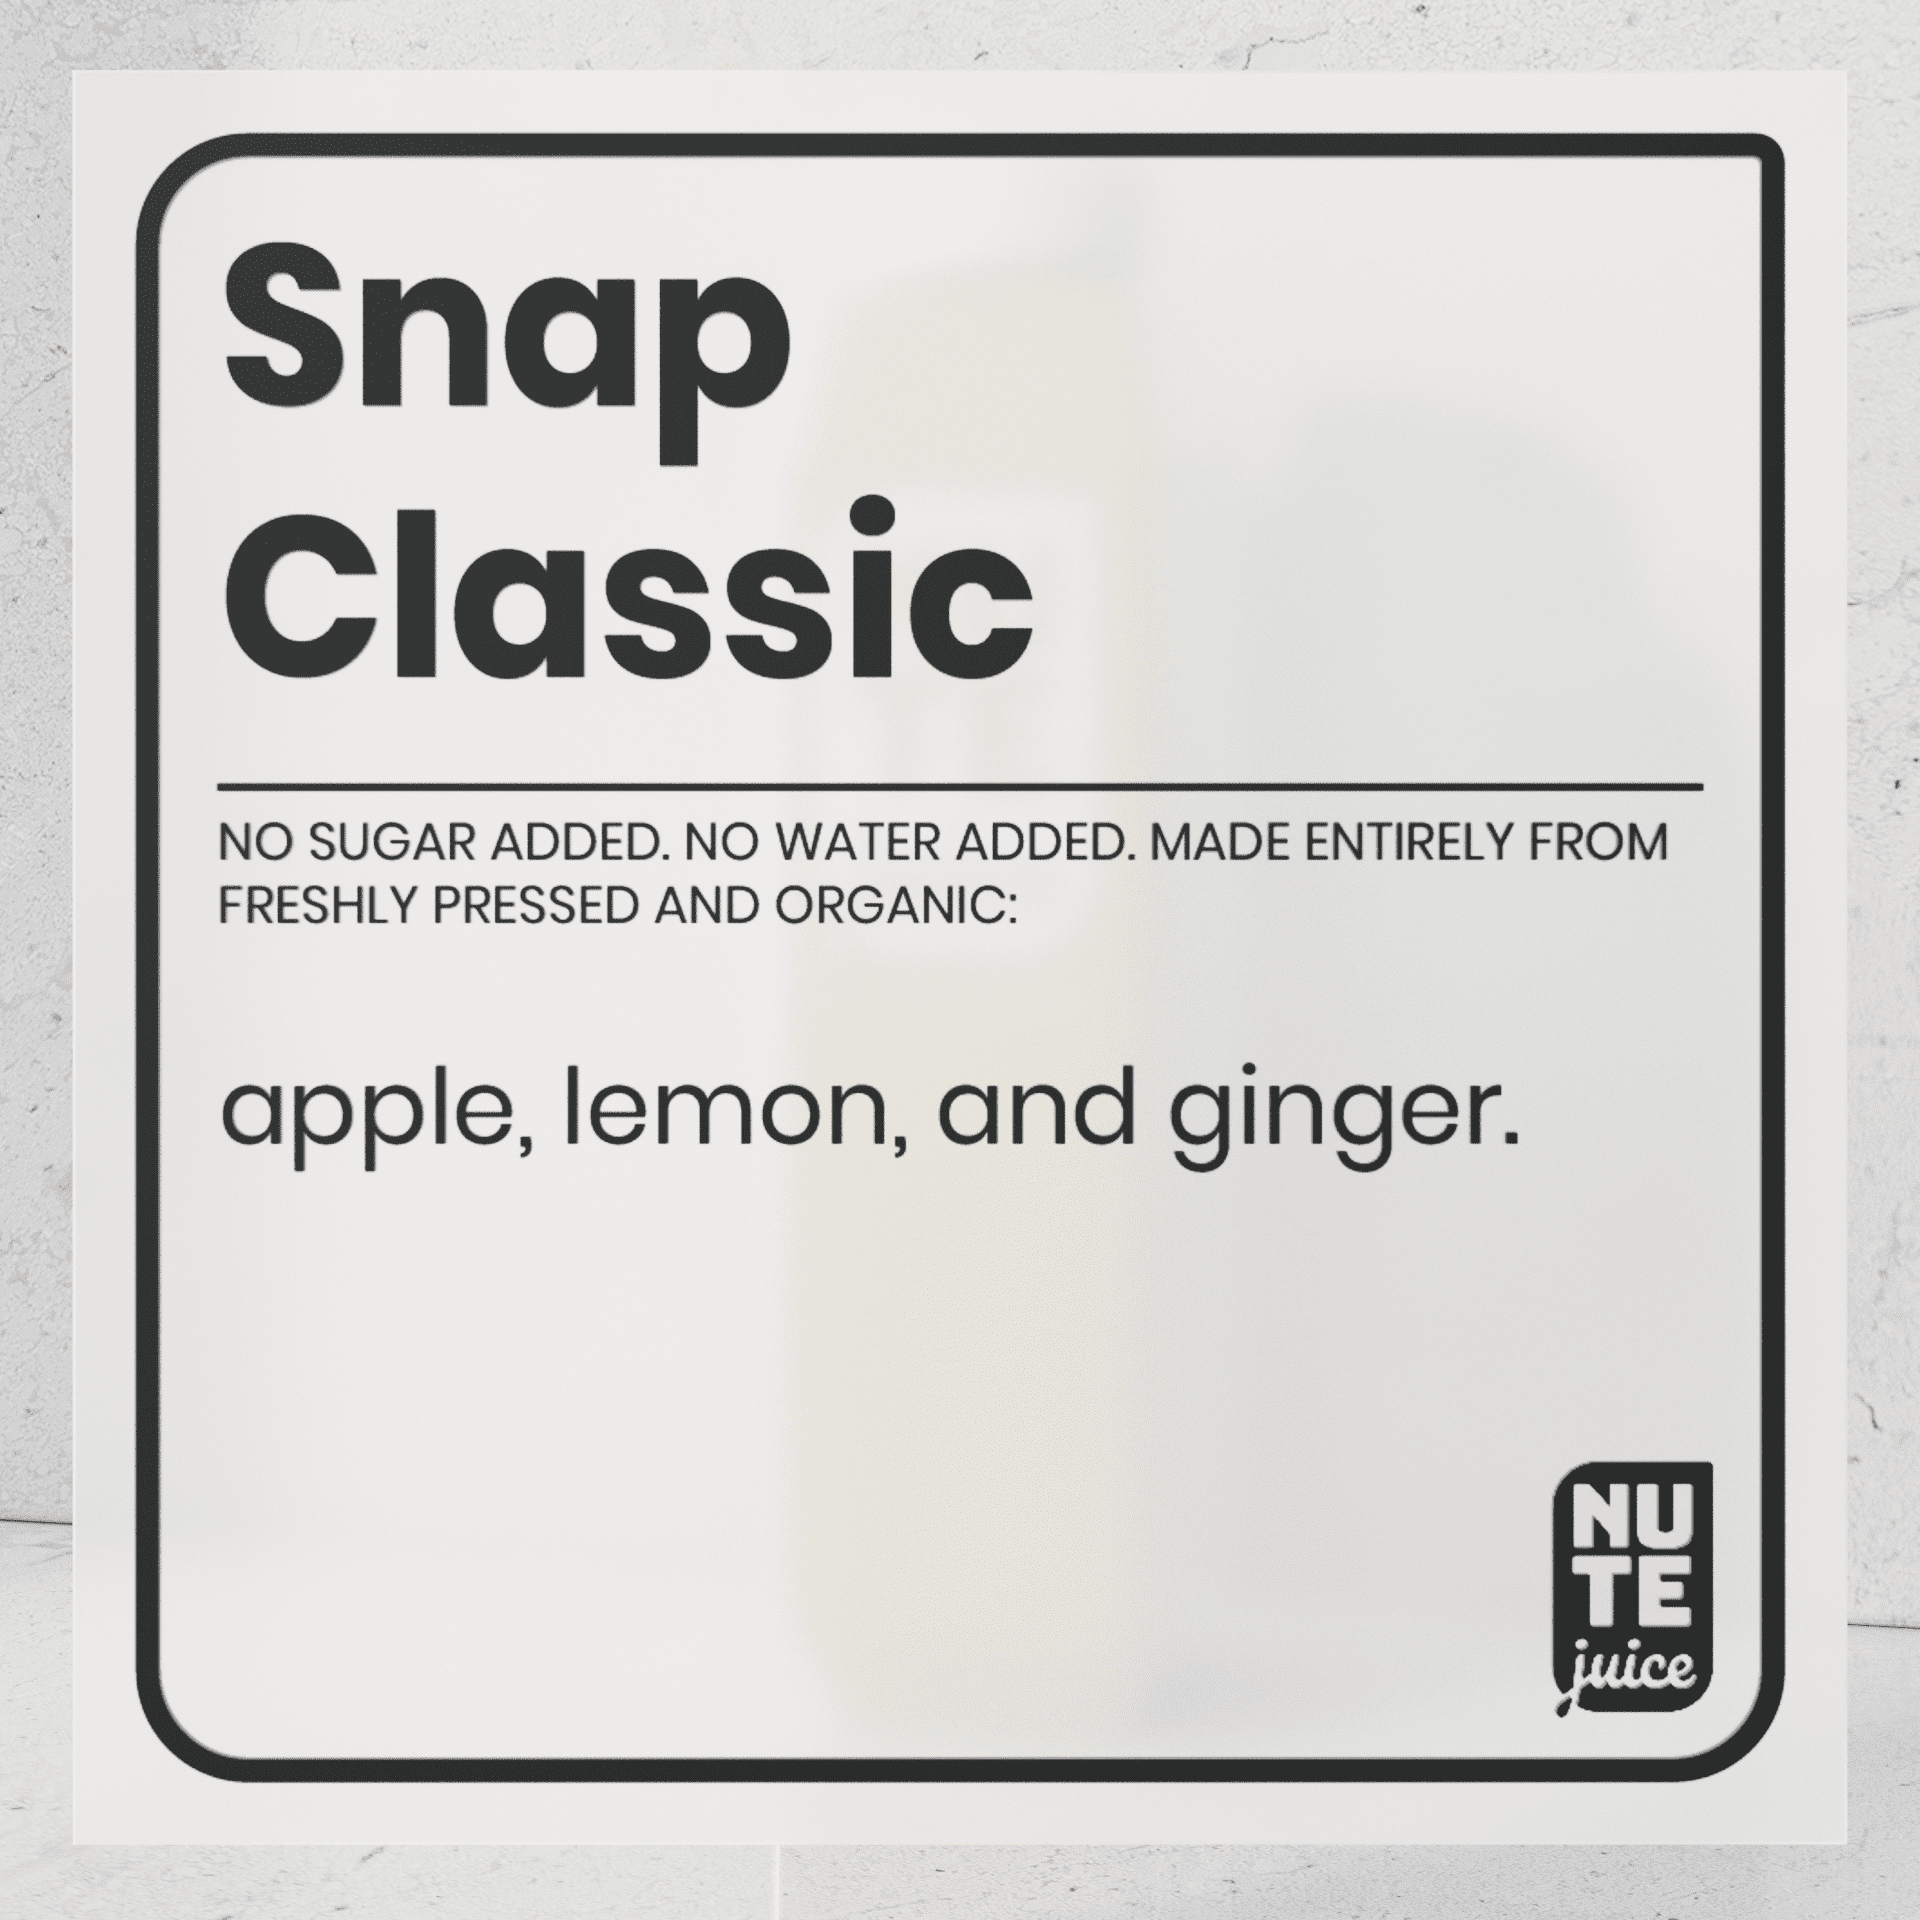 snap classic cleanse ingredients